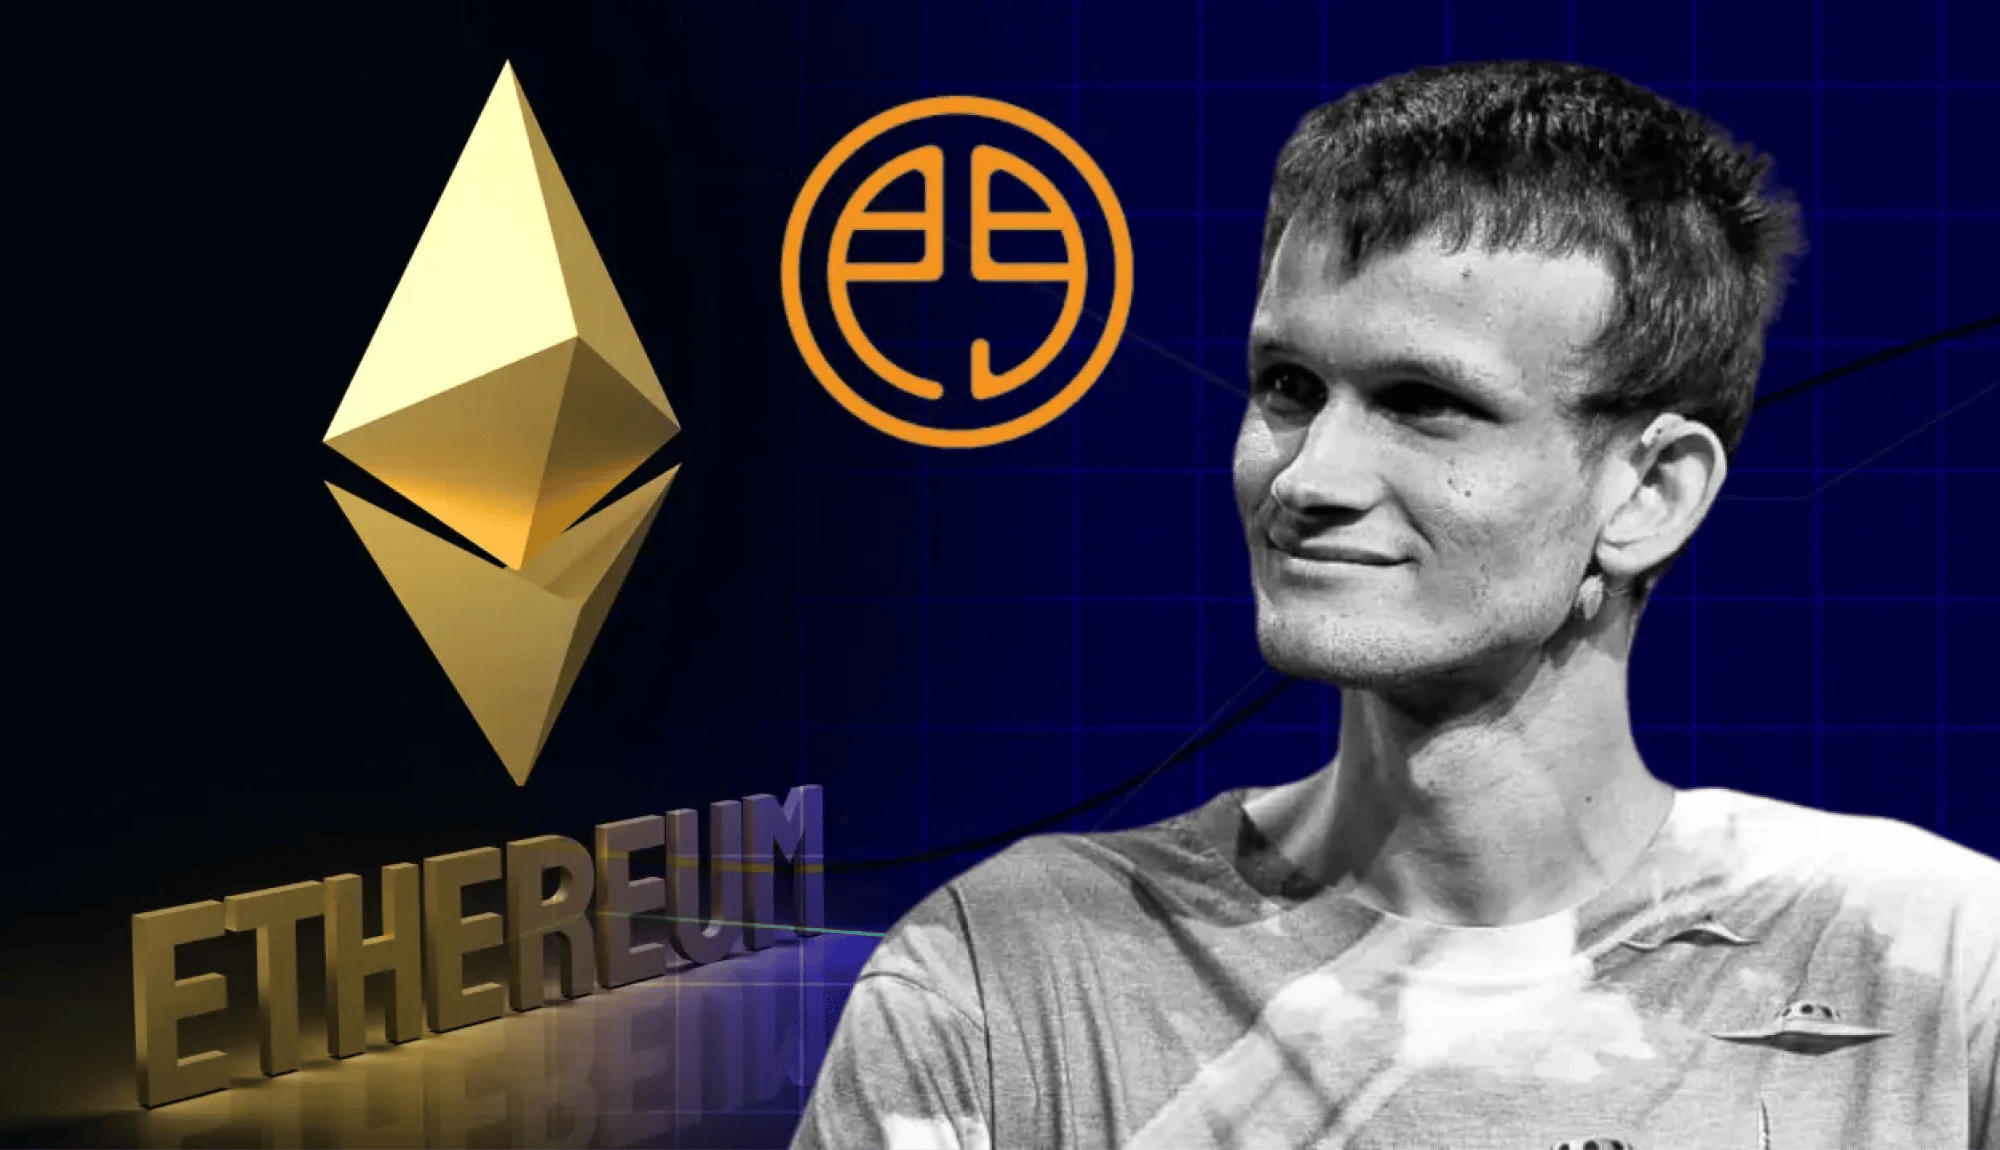 Gatecoin Hack Allegations: Ethereum Founder in the Spotlight